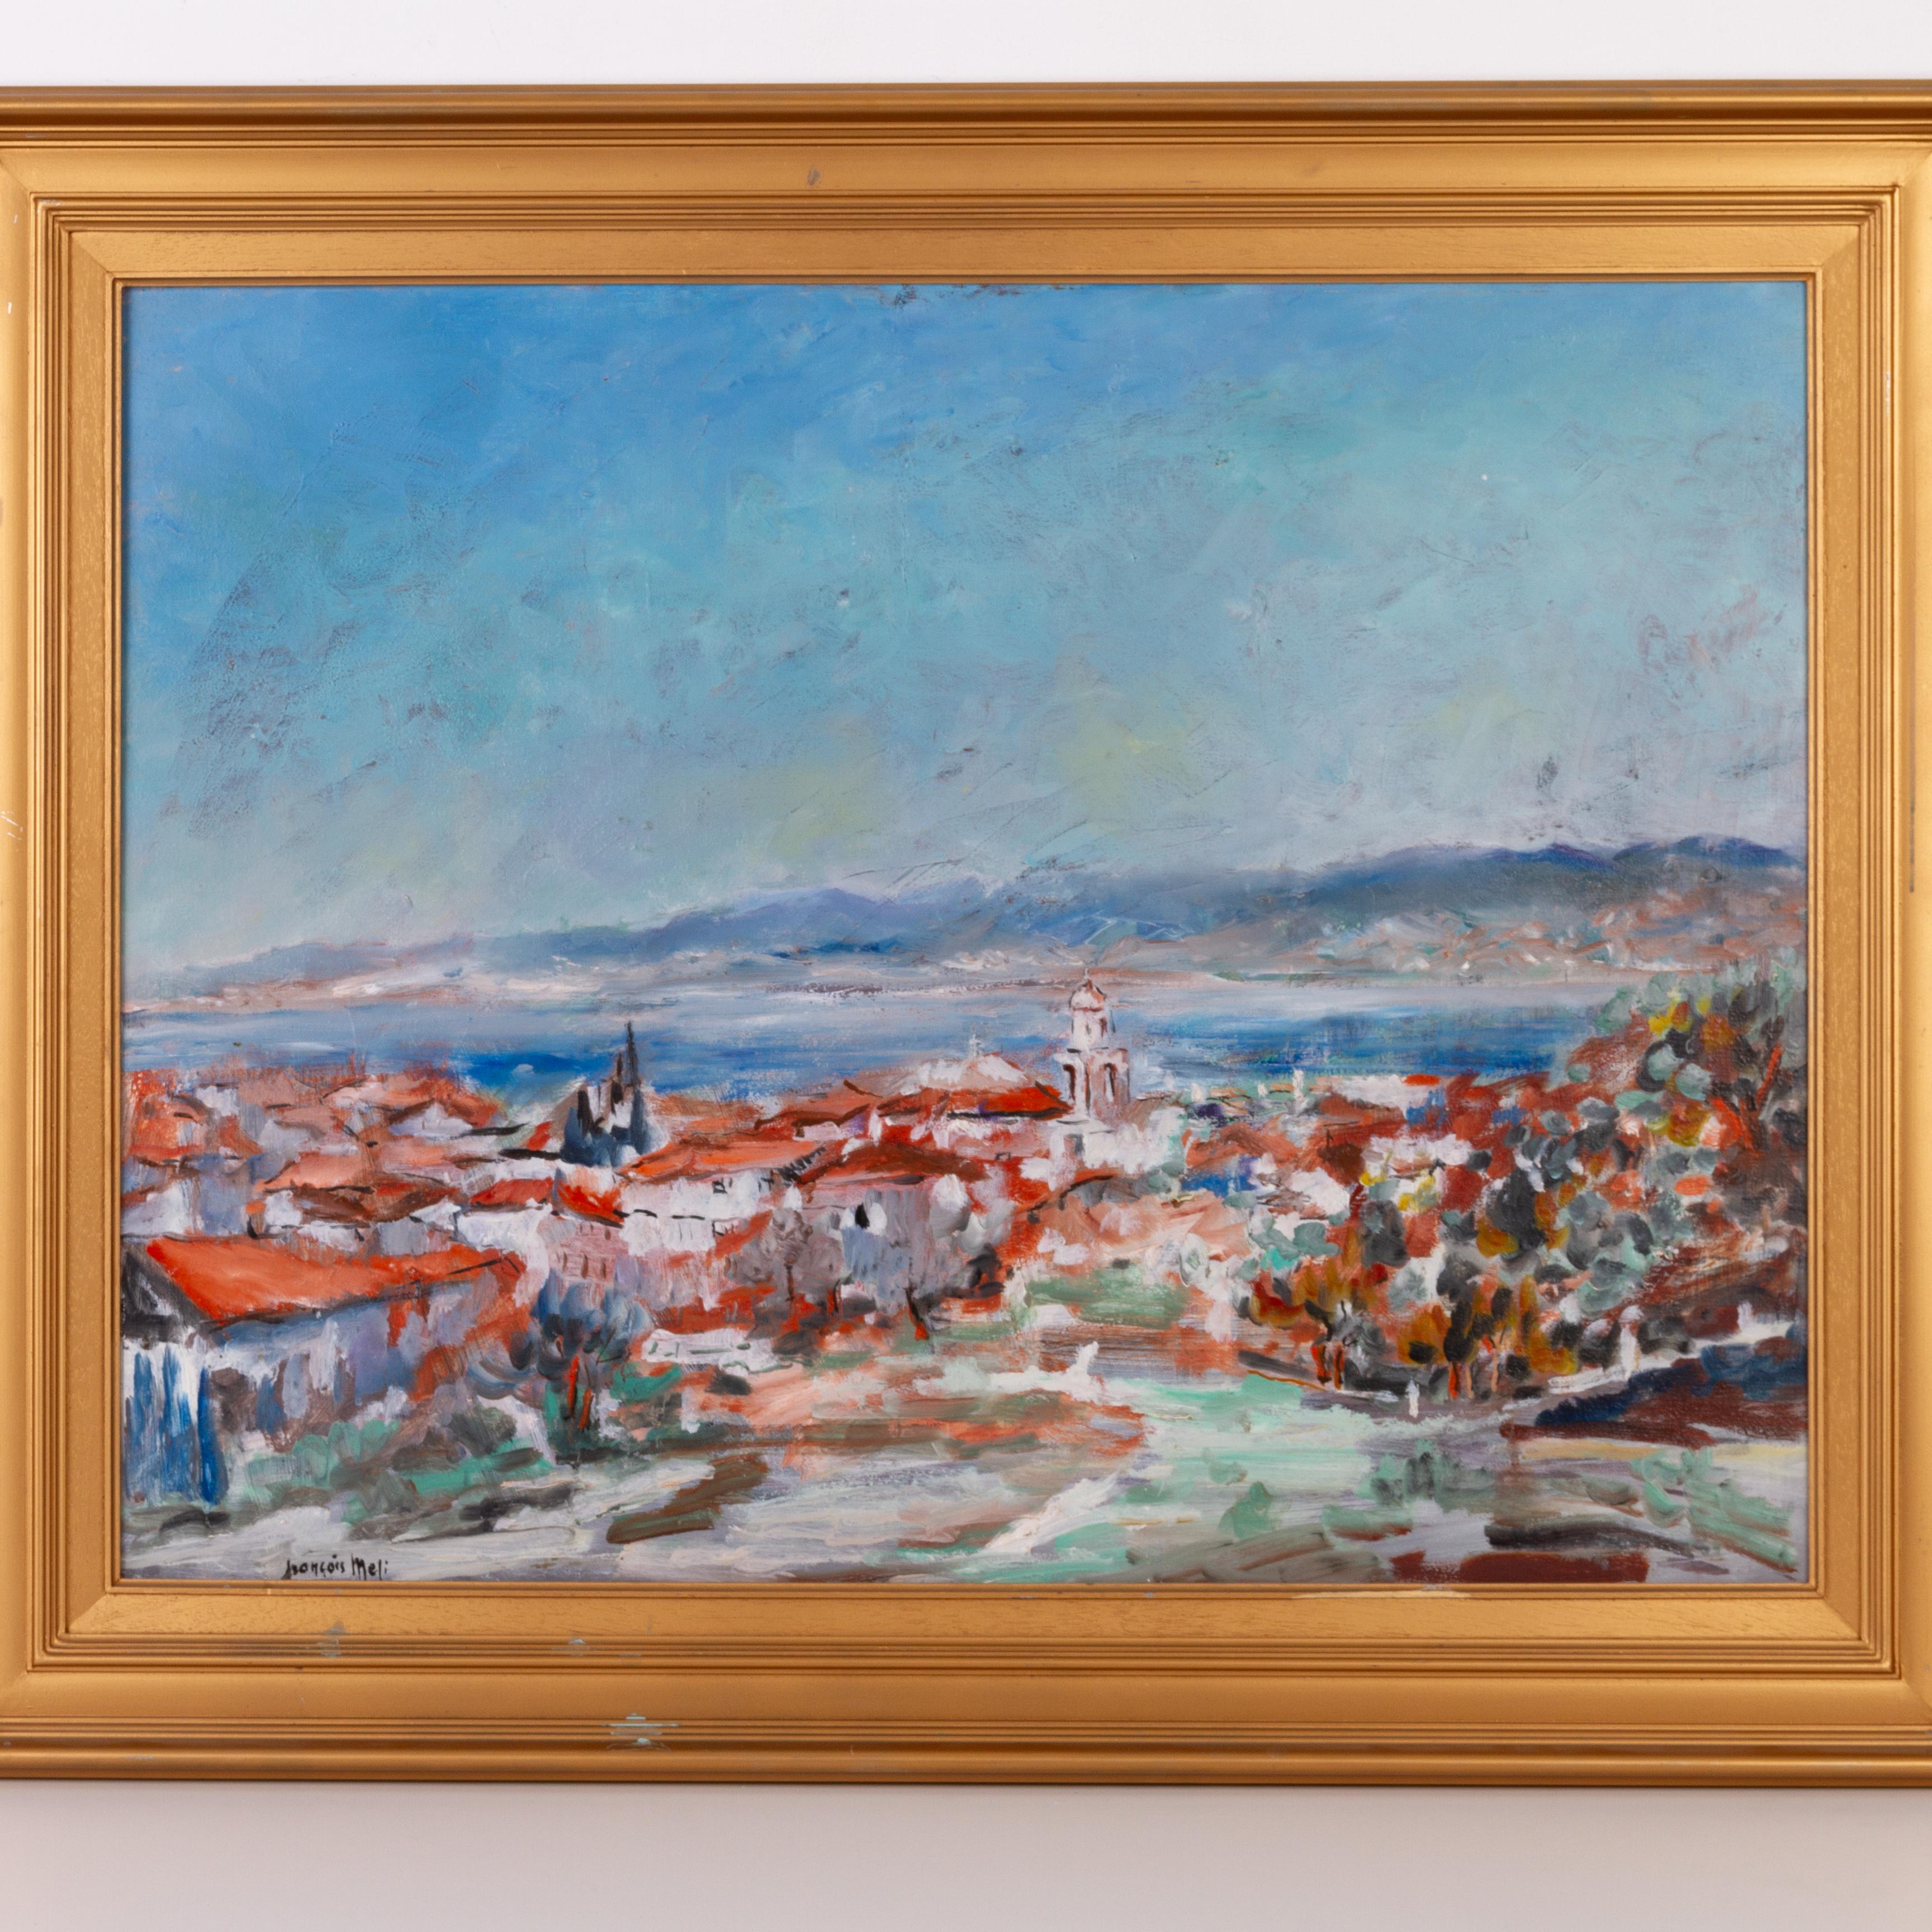 In good condition
From a private collection
Free international shipping
Francois Meli Large Mediterranean Landscape Oil Painting Signed
